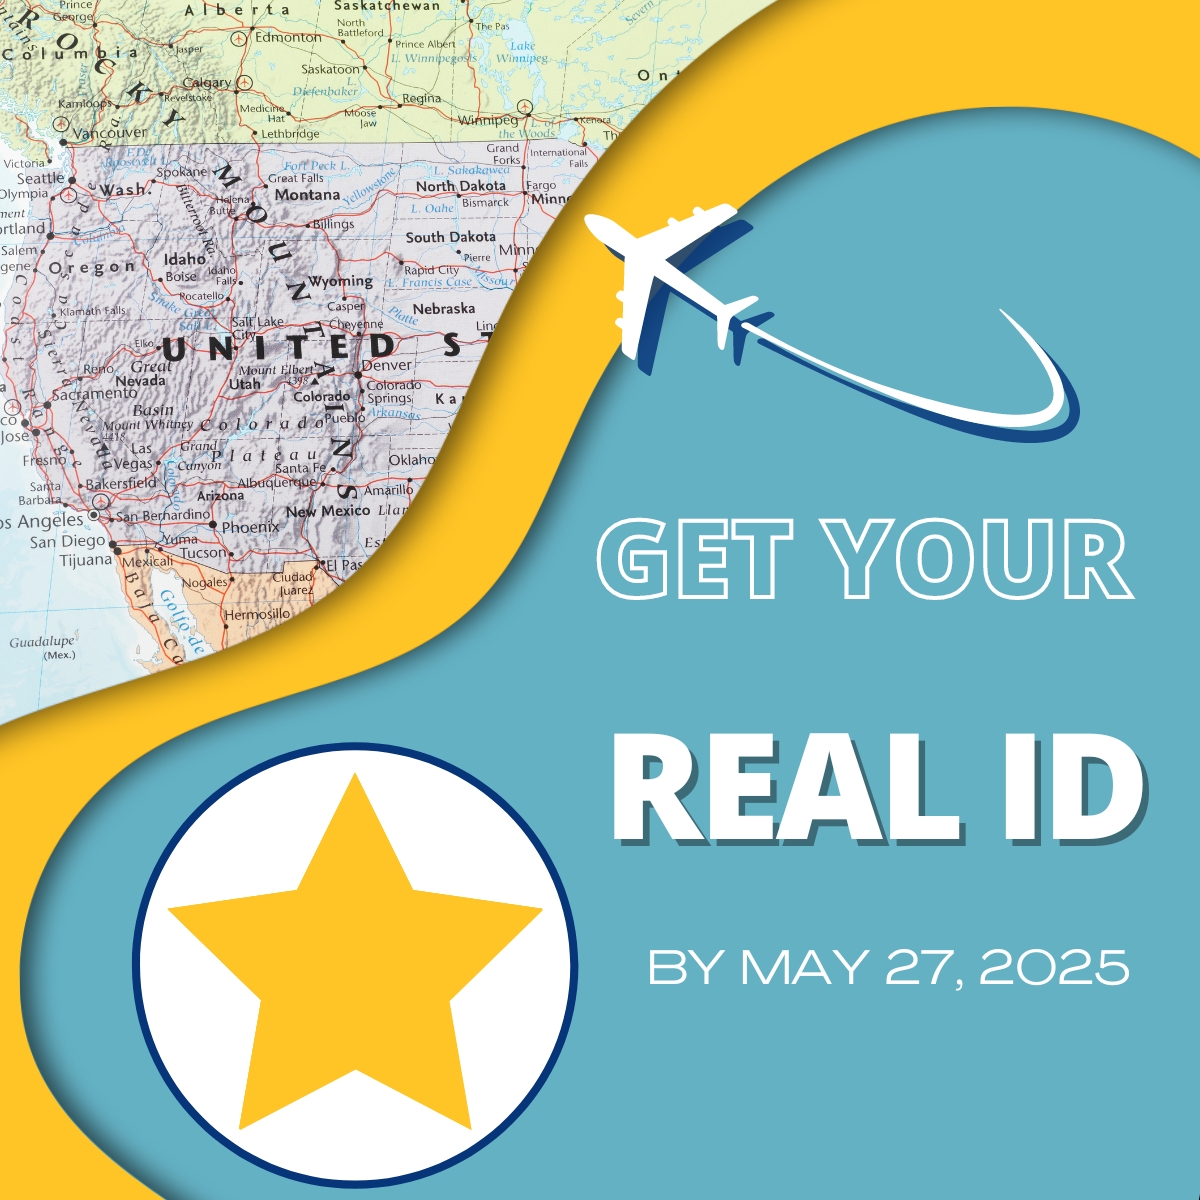 The deadline is less than a year away. You have until May 7, 2025 to become REAL ID compliant. Why wait? We can help you get your ⭐️ today. Visit secureid.dmv.de.gov for more. #NetDE #realid